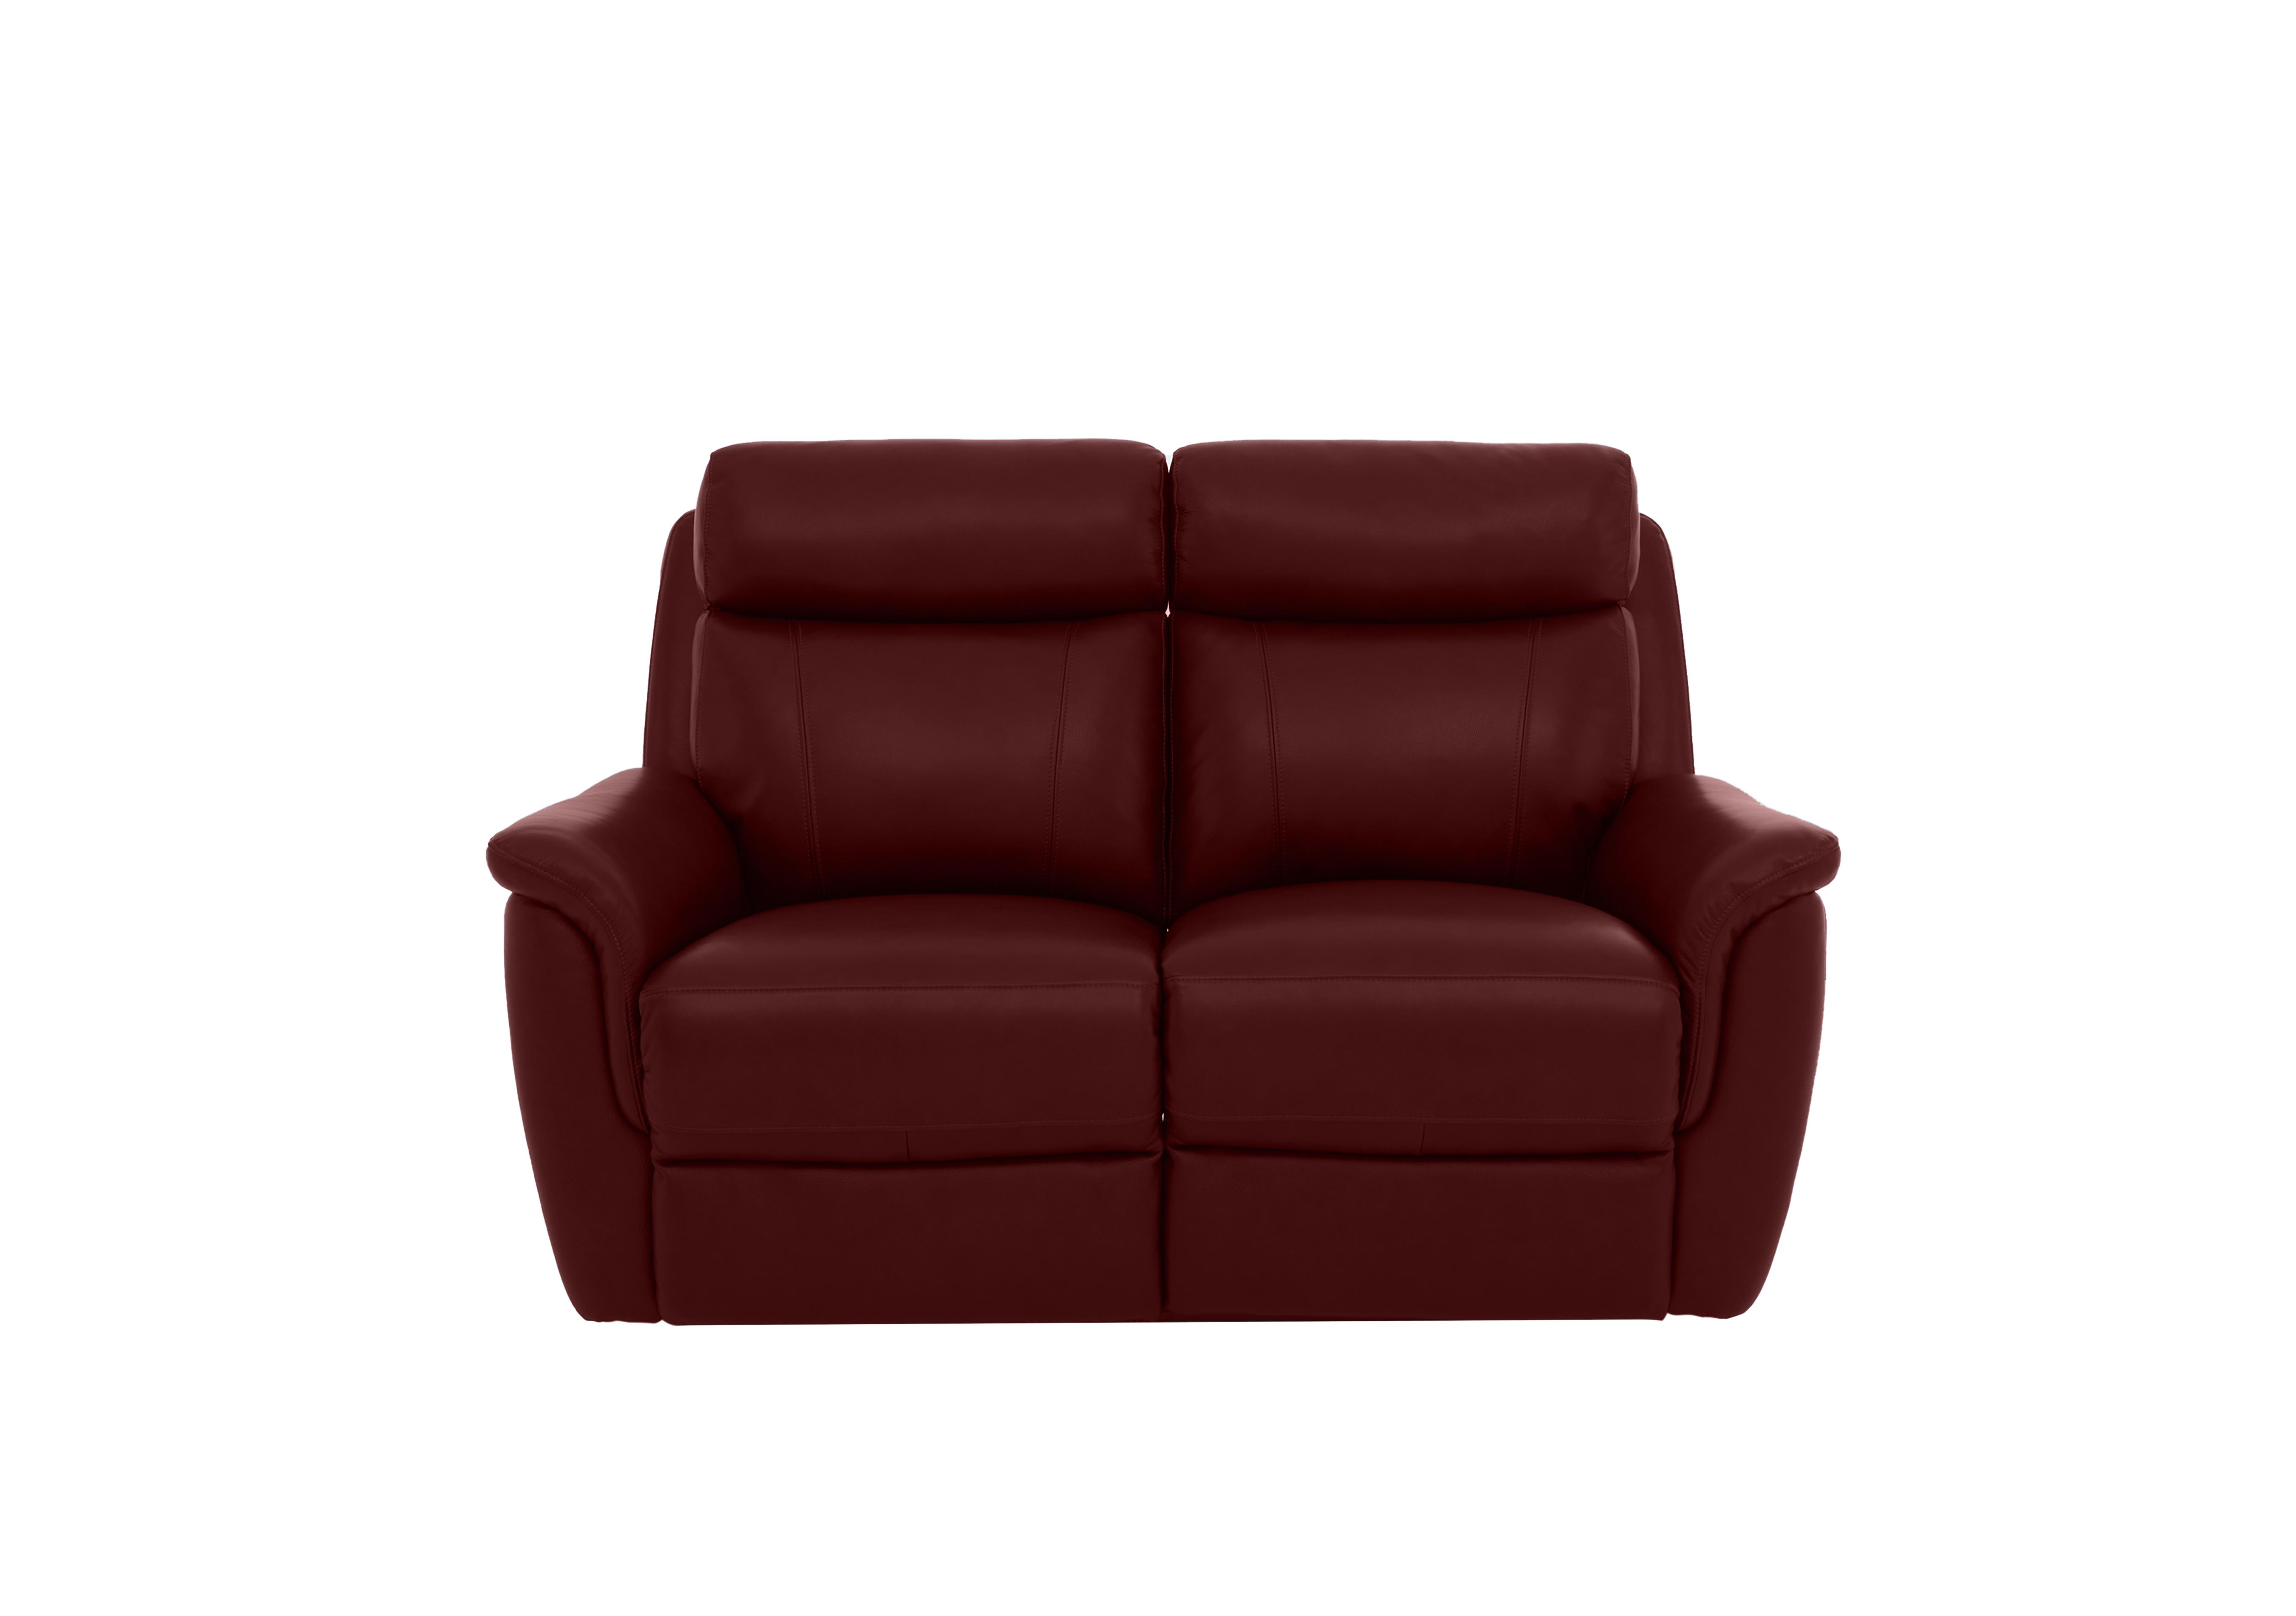 Orlando 2 Seater Leather Sofa in 60/15 Ruby on Furniture Village